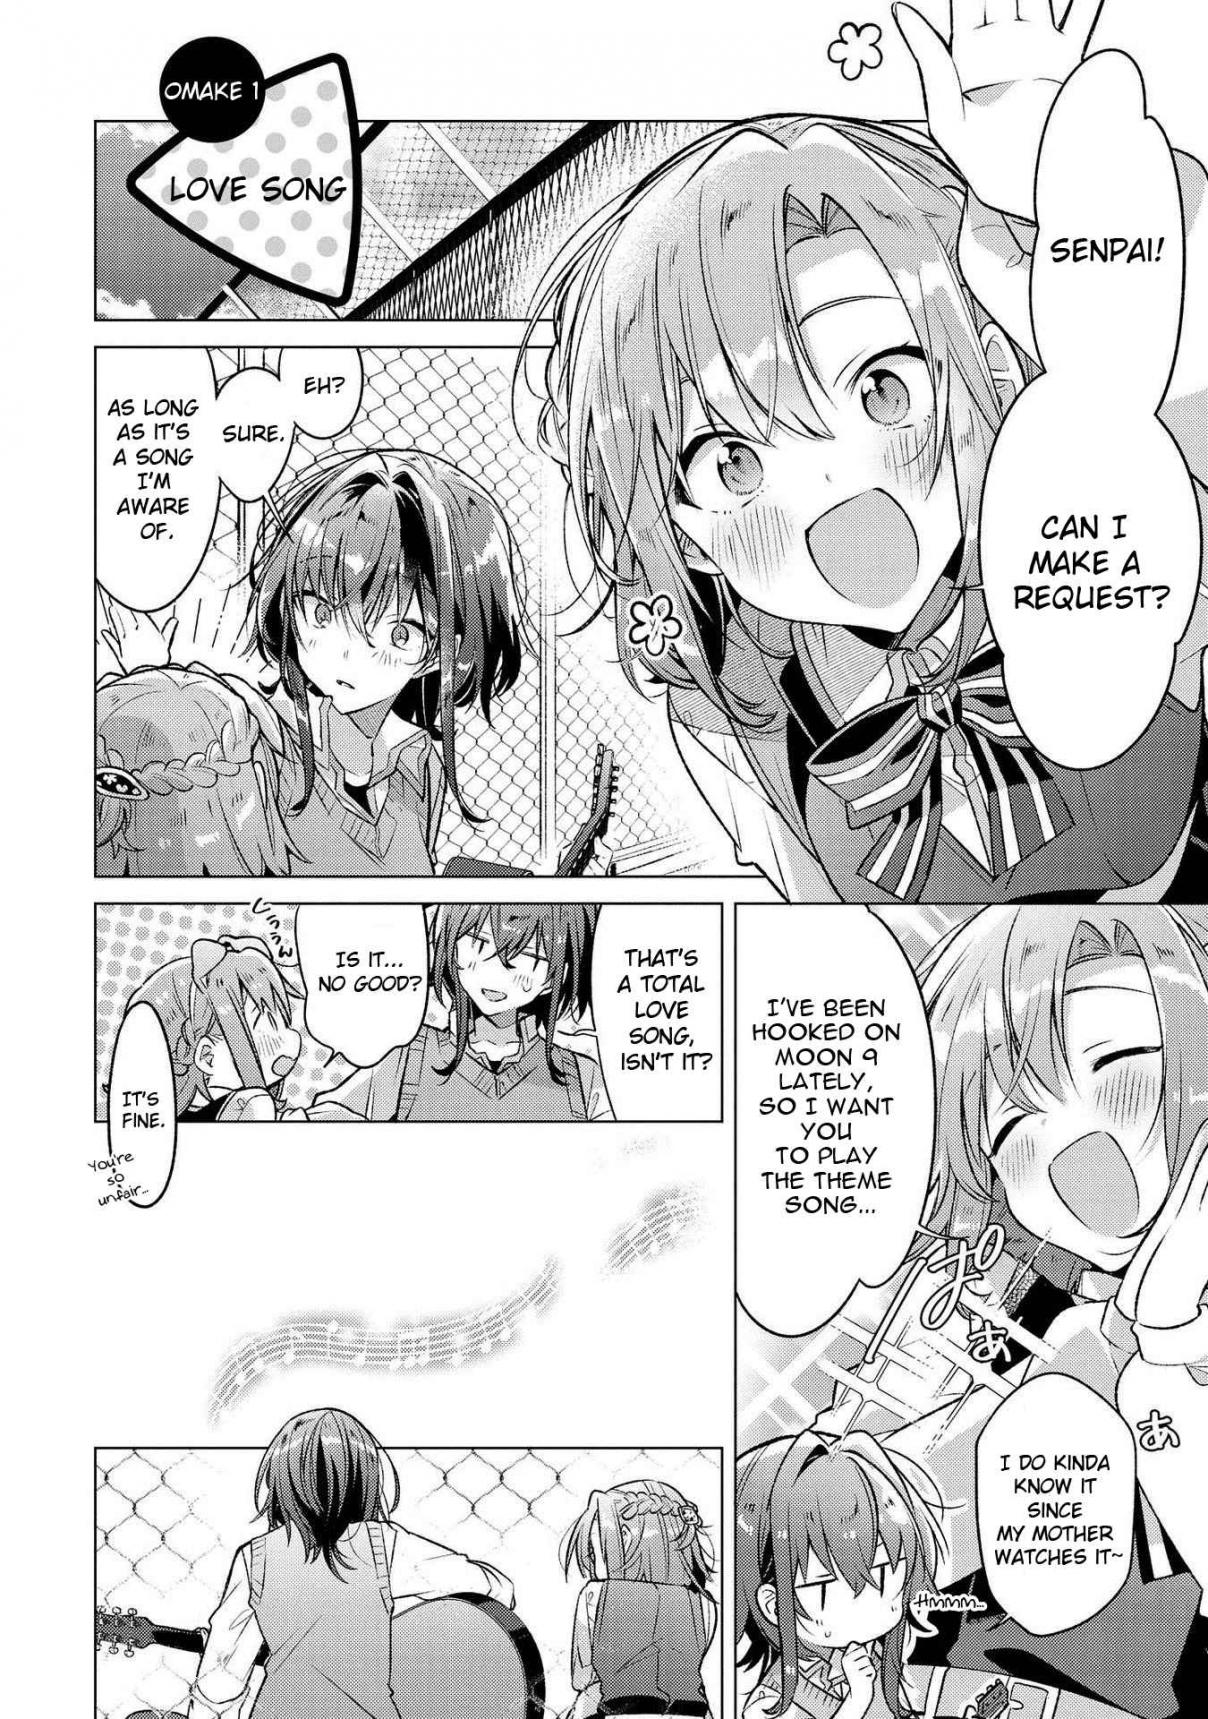 Whispering You a Love Song Vol. 1 Ch. 5.5 Volume 1 Extras